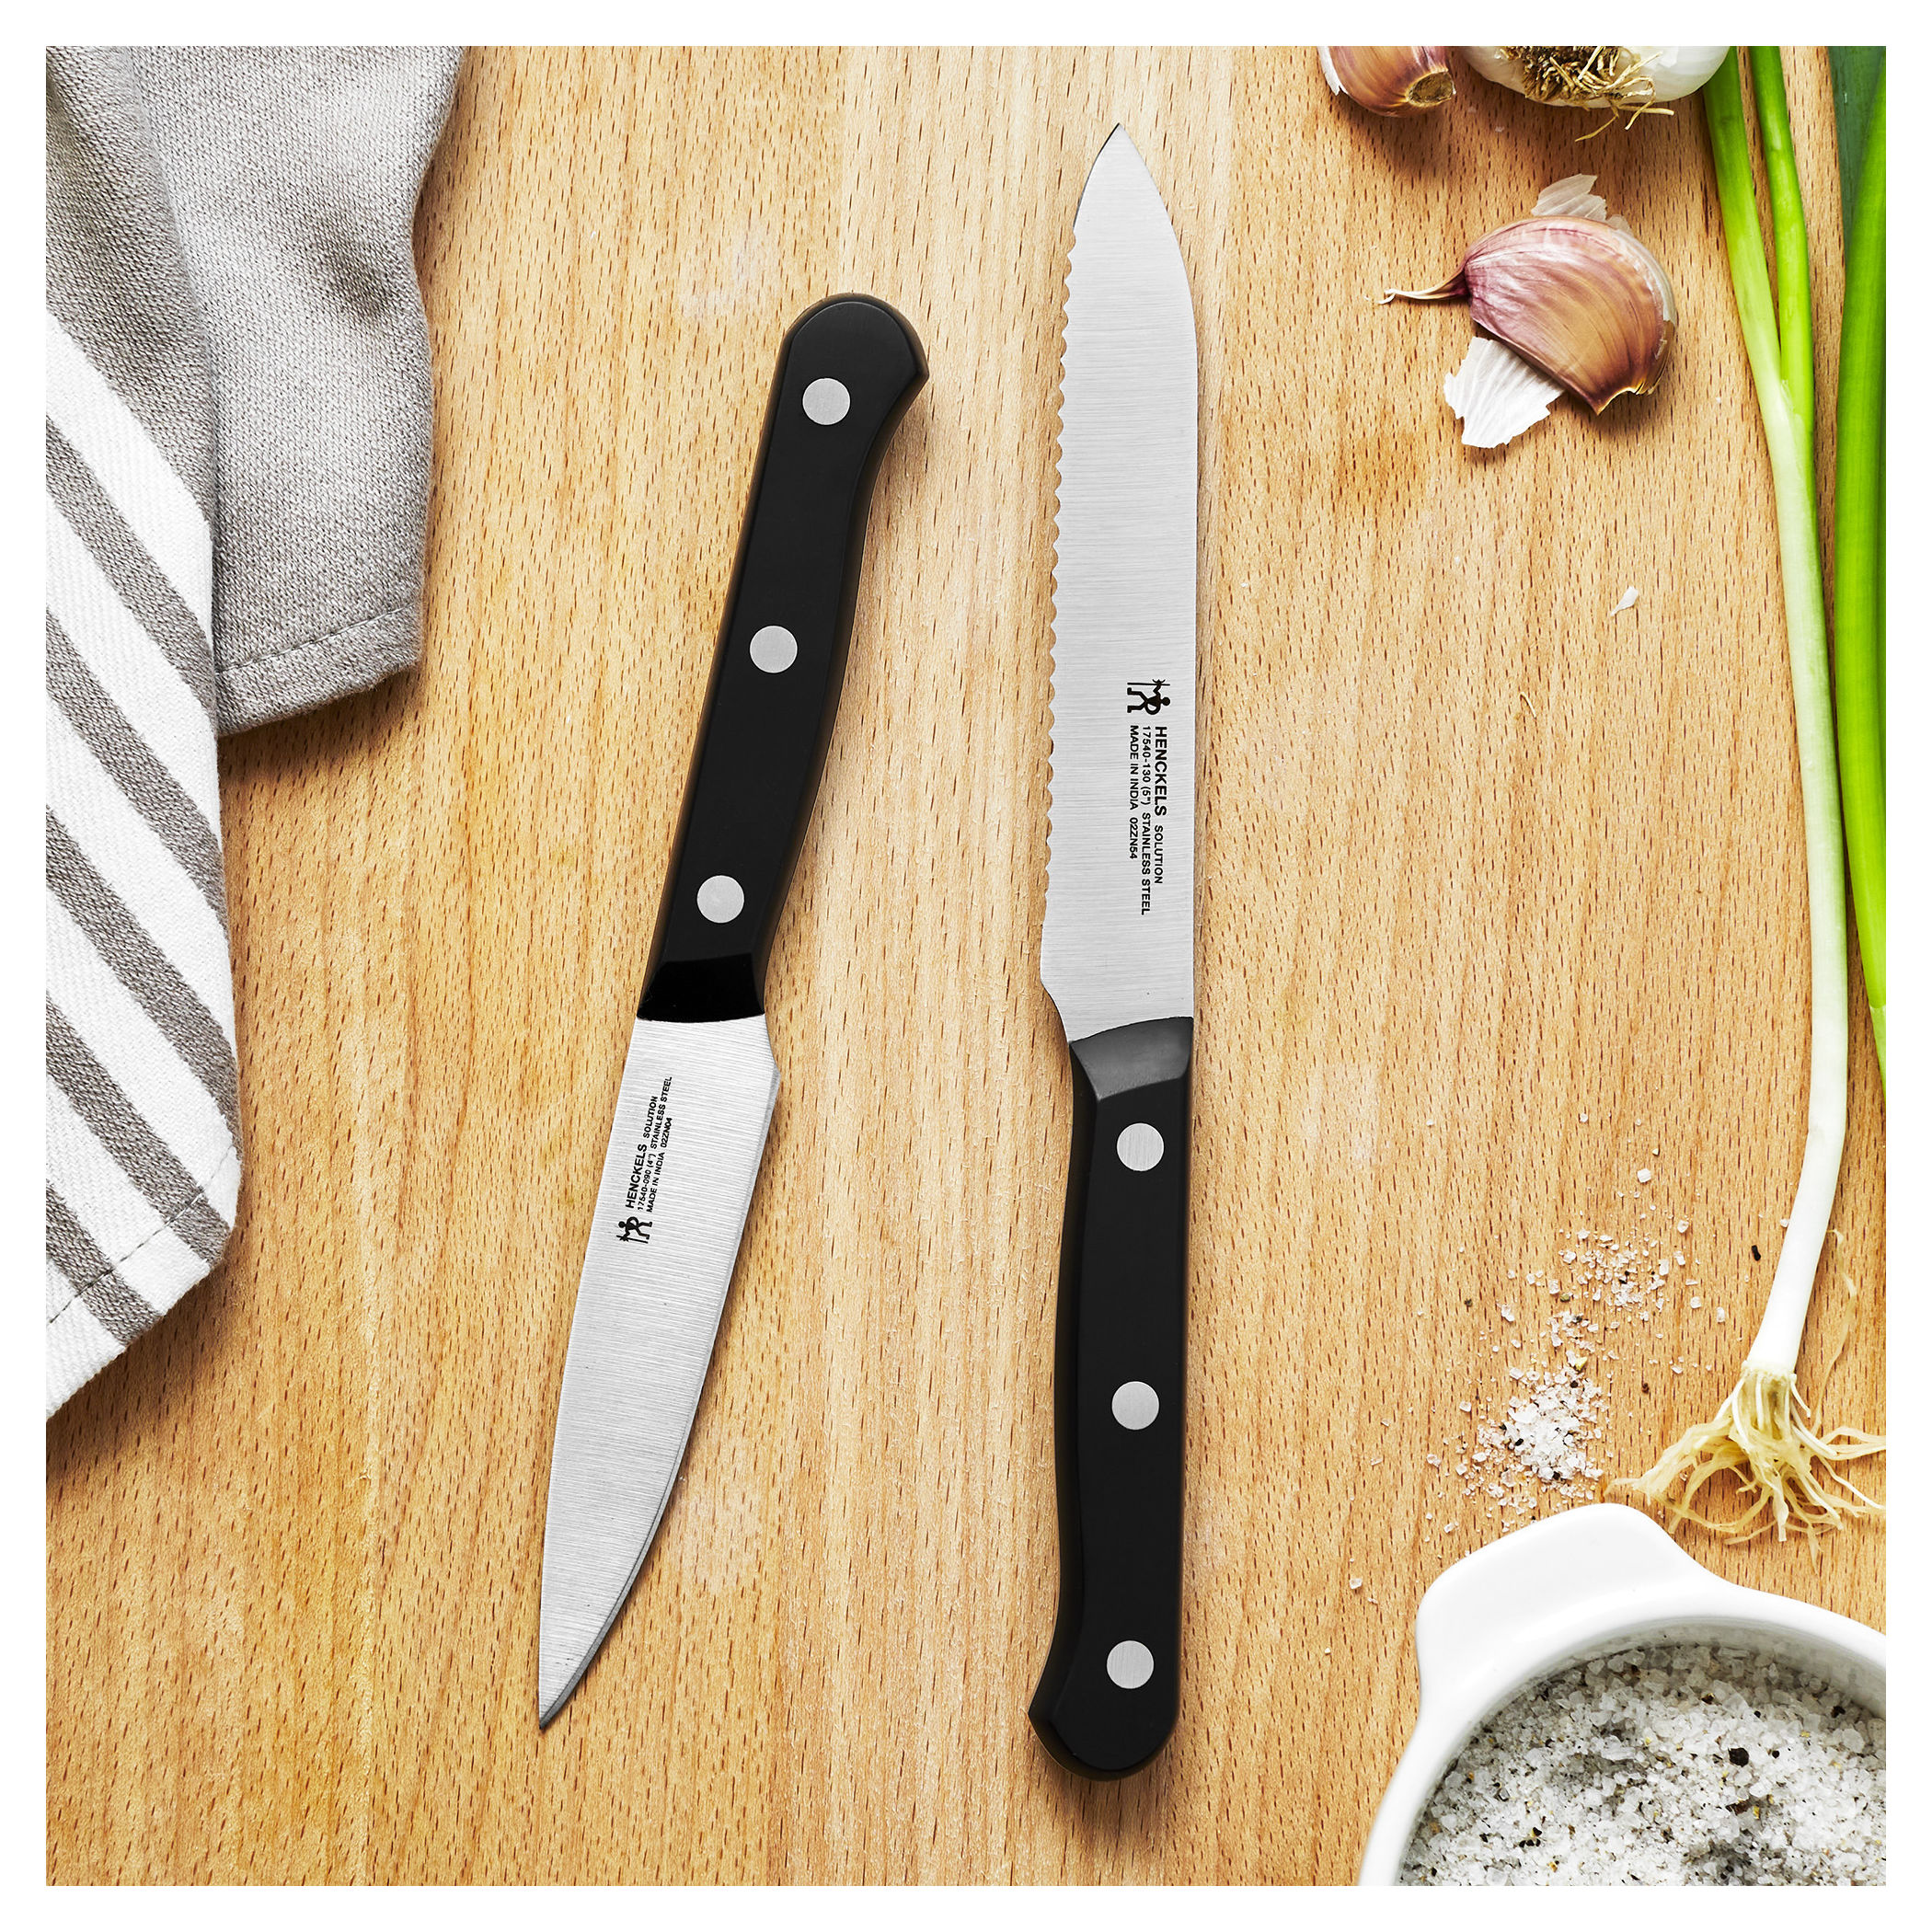  ZWILLING J.A. Henckels Paring Knife, 4 Inch.: Kitchen Utility  Knives: Home & Kitchen